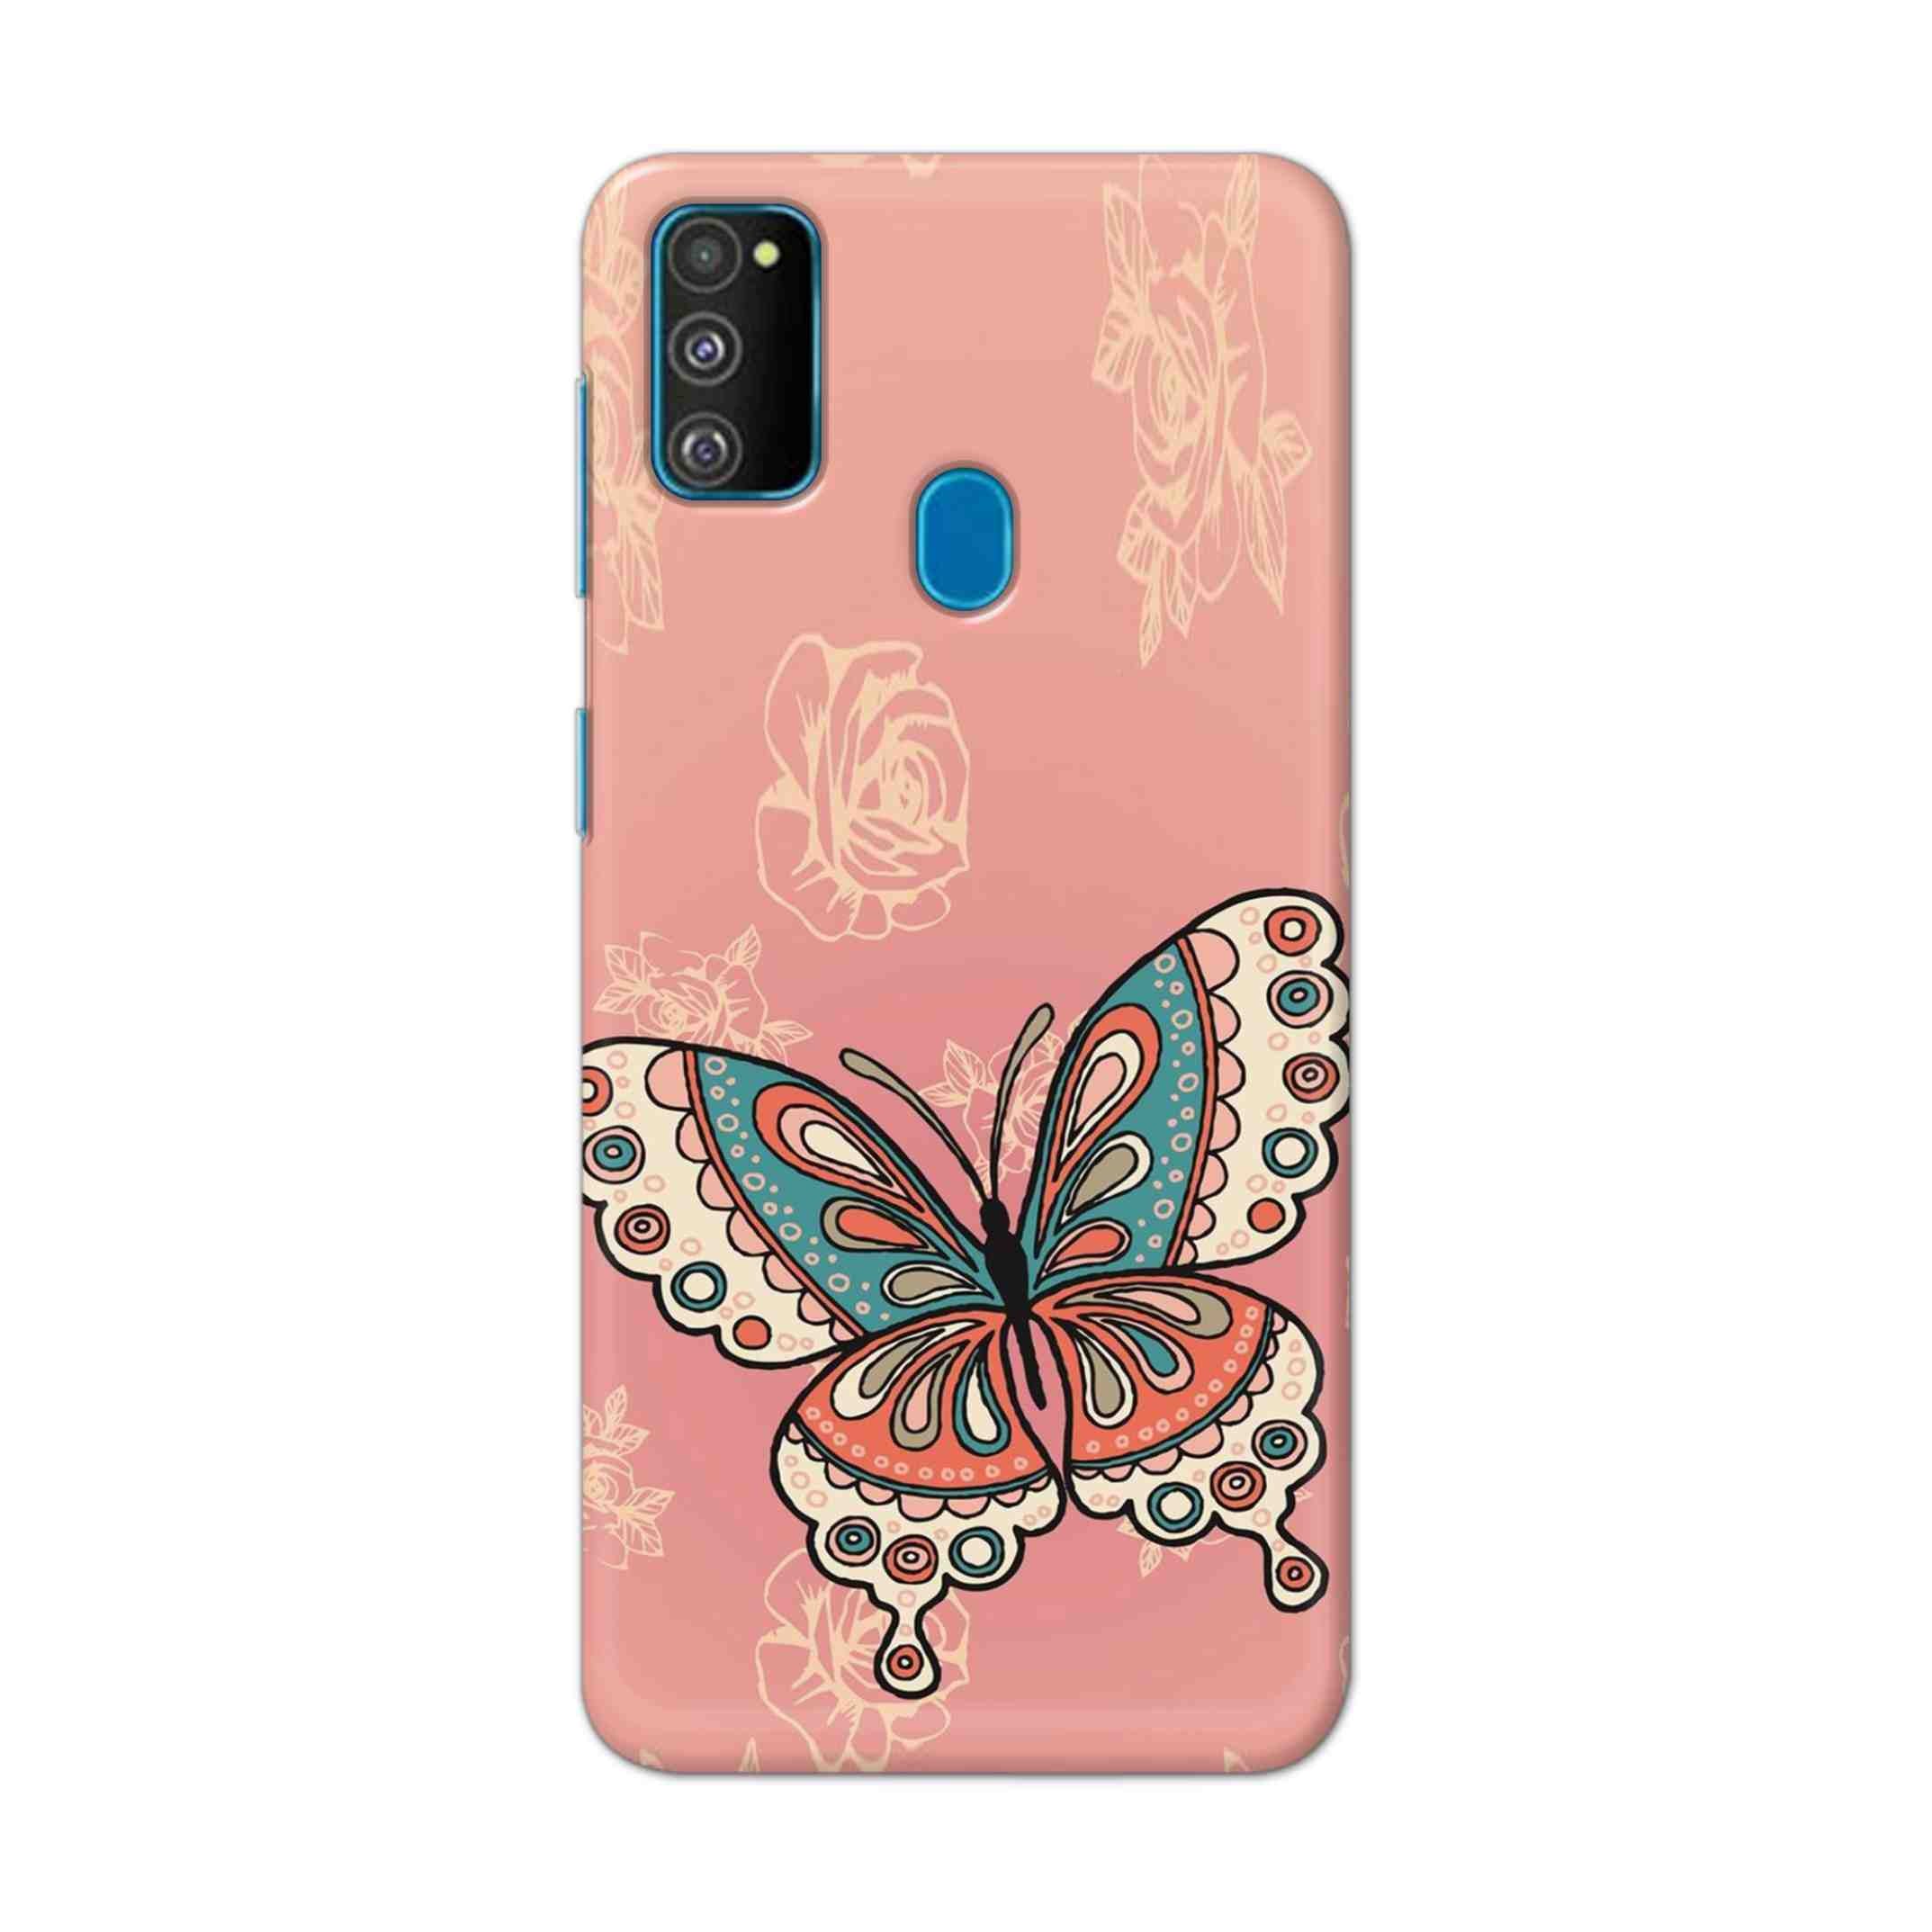 Buy Butterfly Hard Back Mobile Phone Case Cover For Samsung Galaxy M30s Online